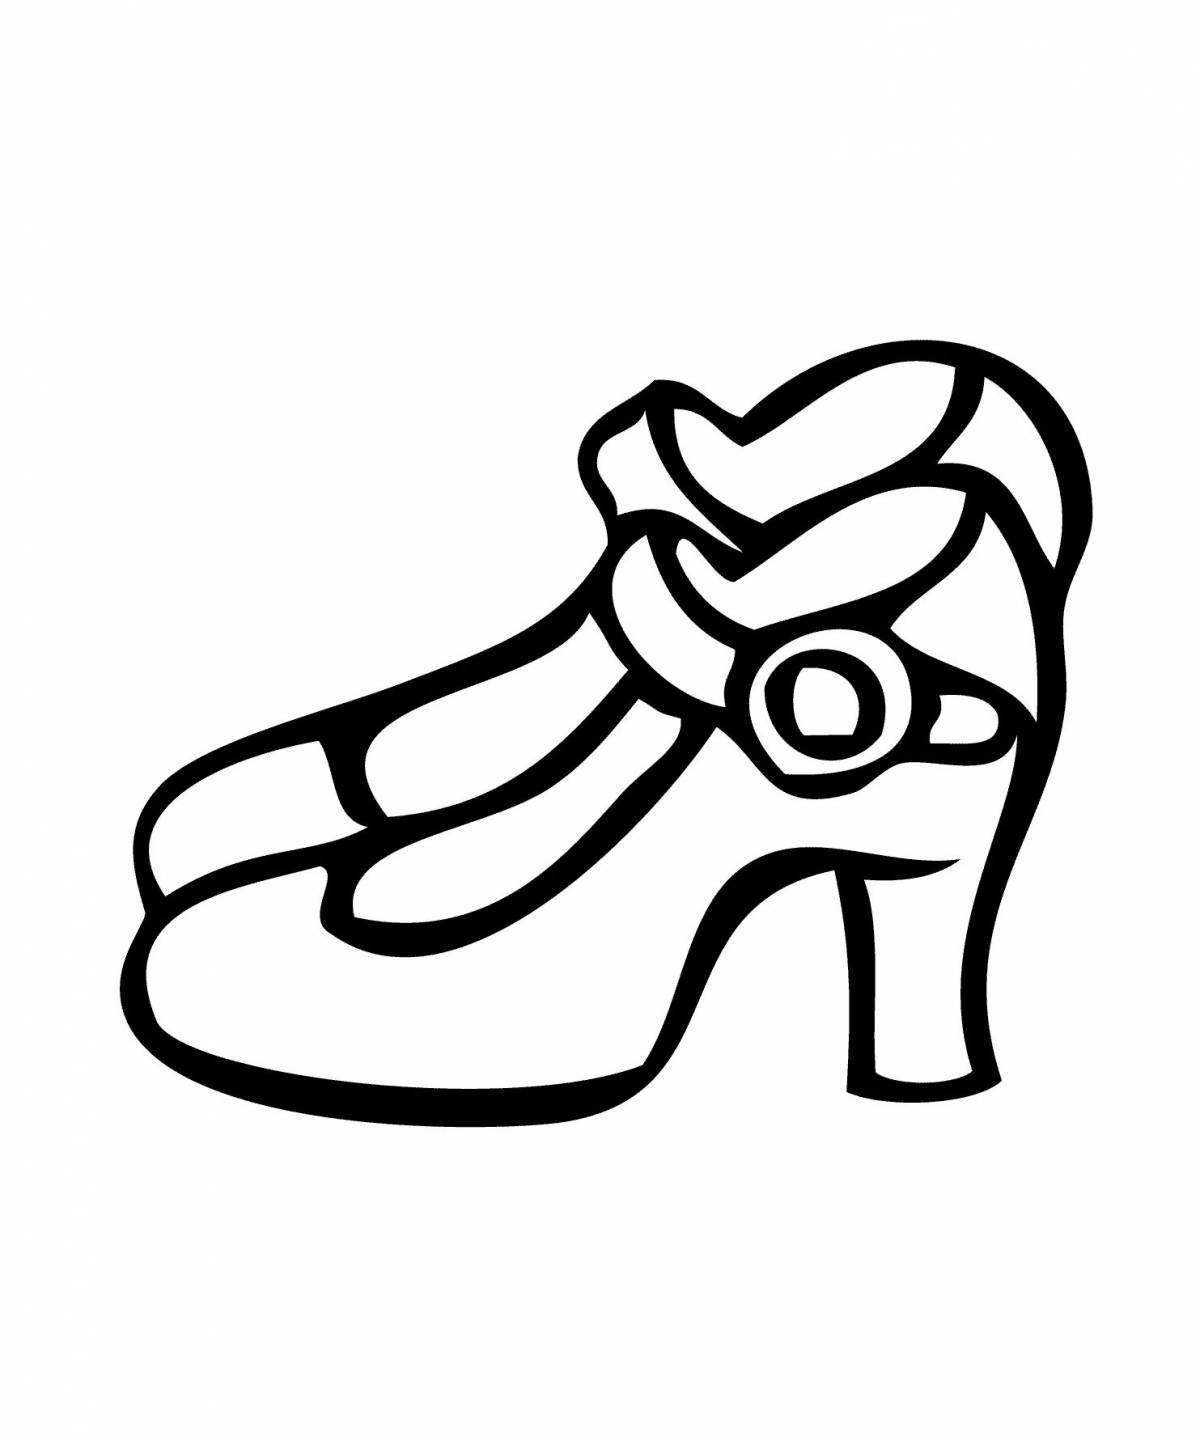 Coloring page dazzling shoes for girls